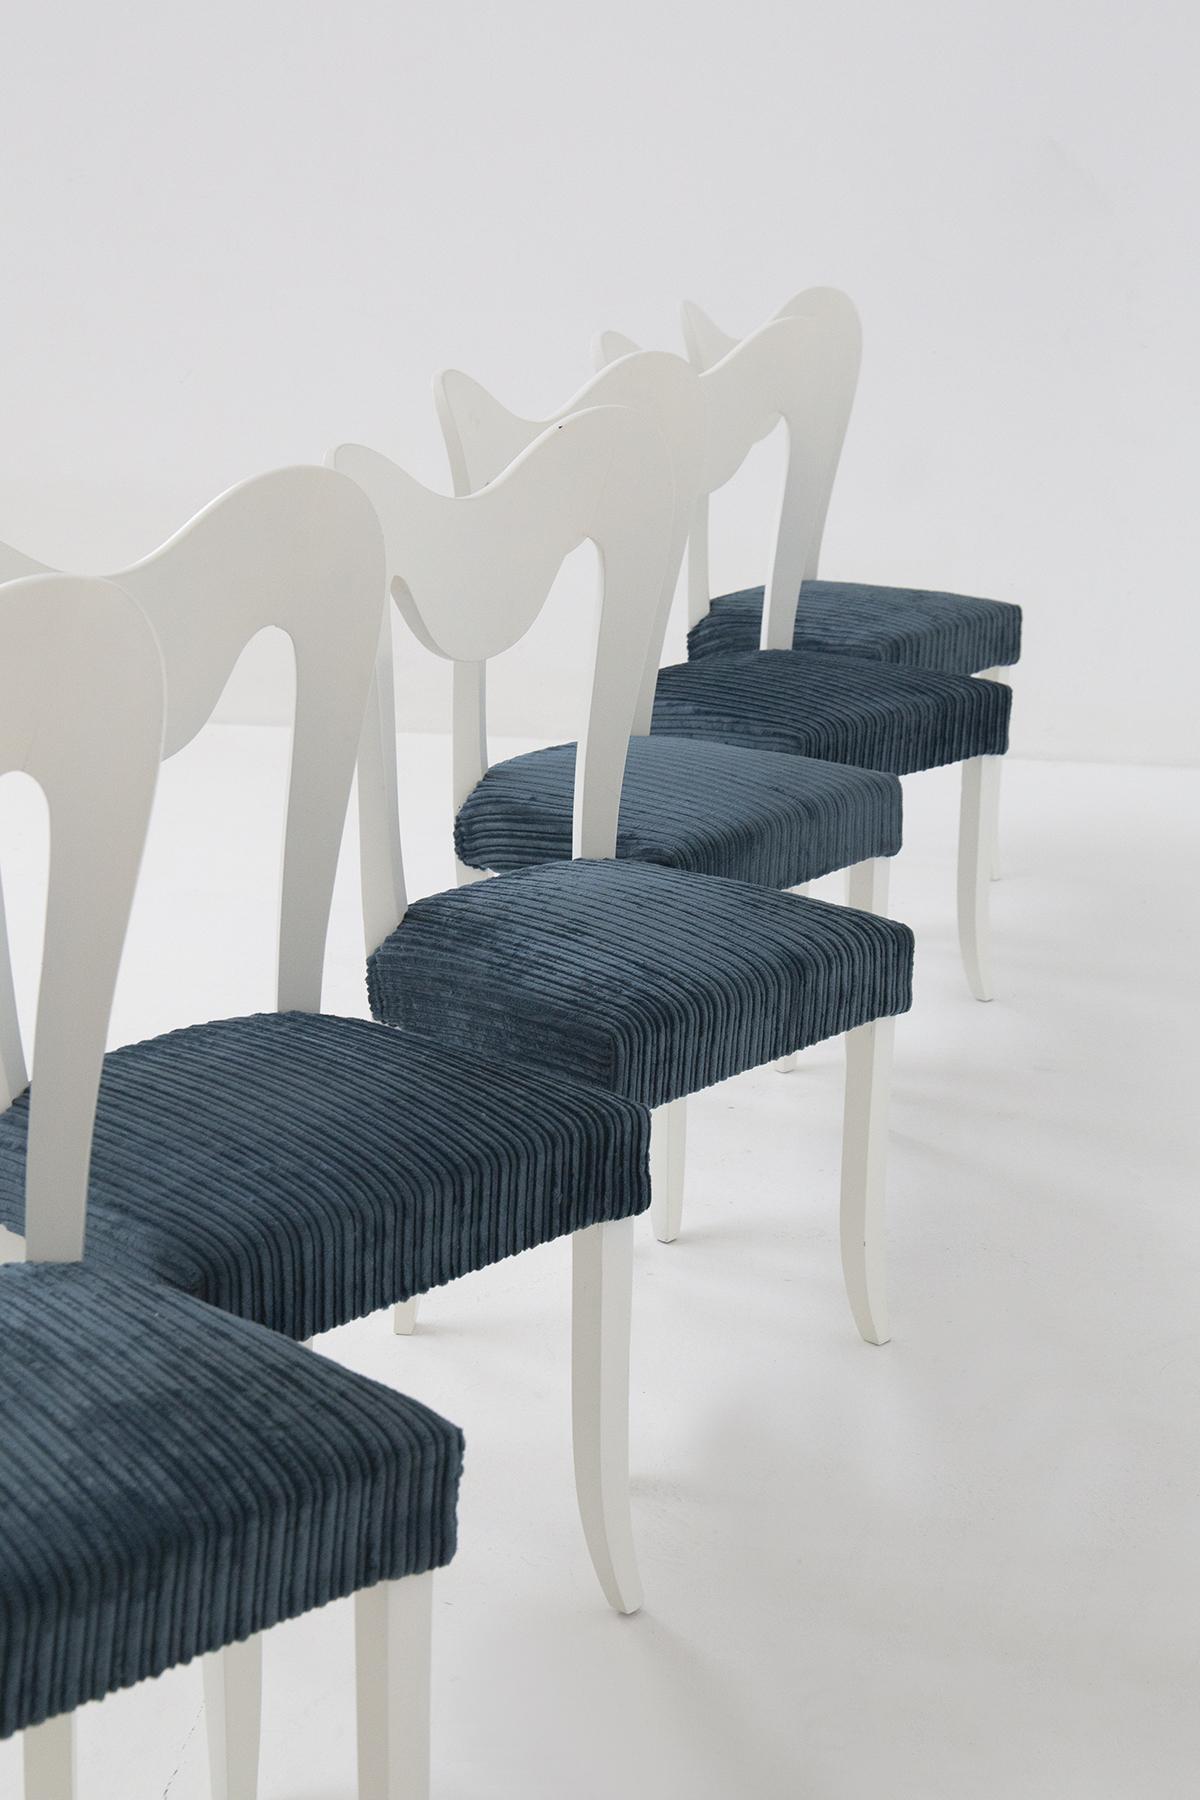 Luigi Scremin Vintage White Wood and Velvet Chairs In Good Condition For Sale In Milano, IT